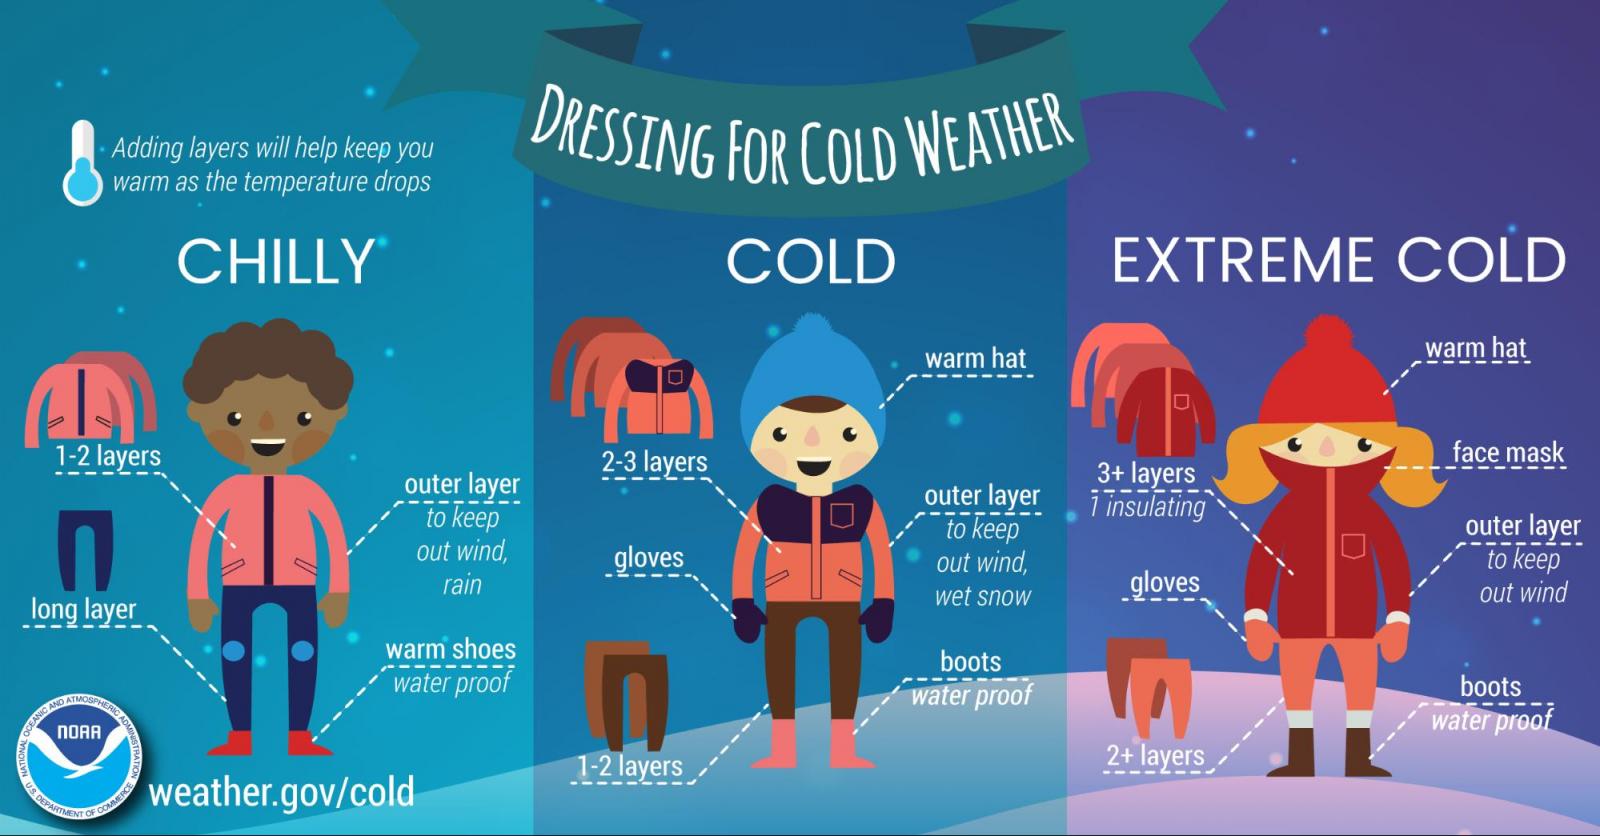 Dressing for the Cold - Infographic. Adding layers will help keep you warm as the temperature drops. Chilly: 1-2 layers; outer layer to keep out wind, rain; long layer on legs; warm shoes (water proof). Cold: 2-3 layers; warm hat; gloves; outer layer to keep out wind, wet snow; 1-2 long layers on legs; boots (water-proof). Extreme cold: 3+ layers (1 insulating); warm hat; gloves; outer layer to keep out wind; 2+ long layers on legs; boots (water proof).